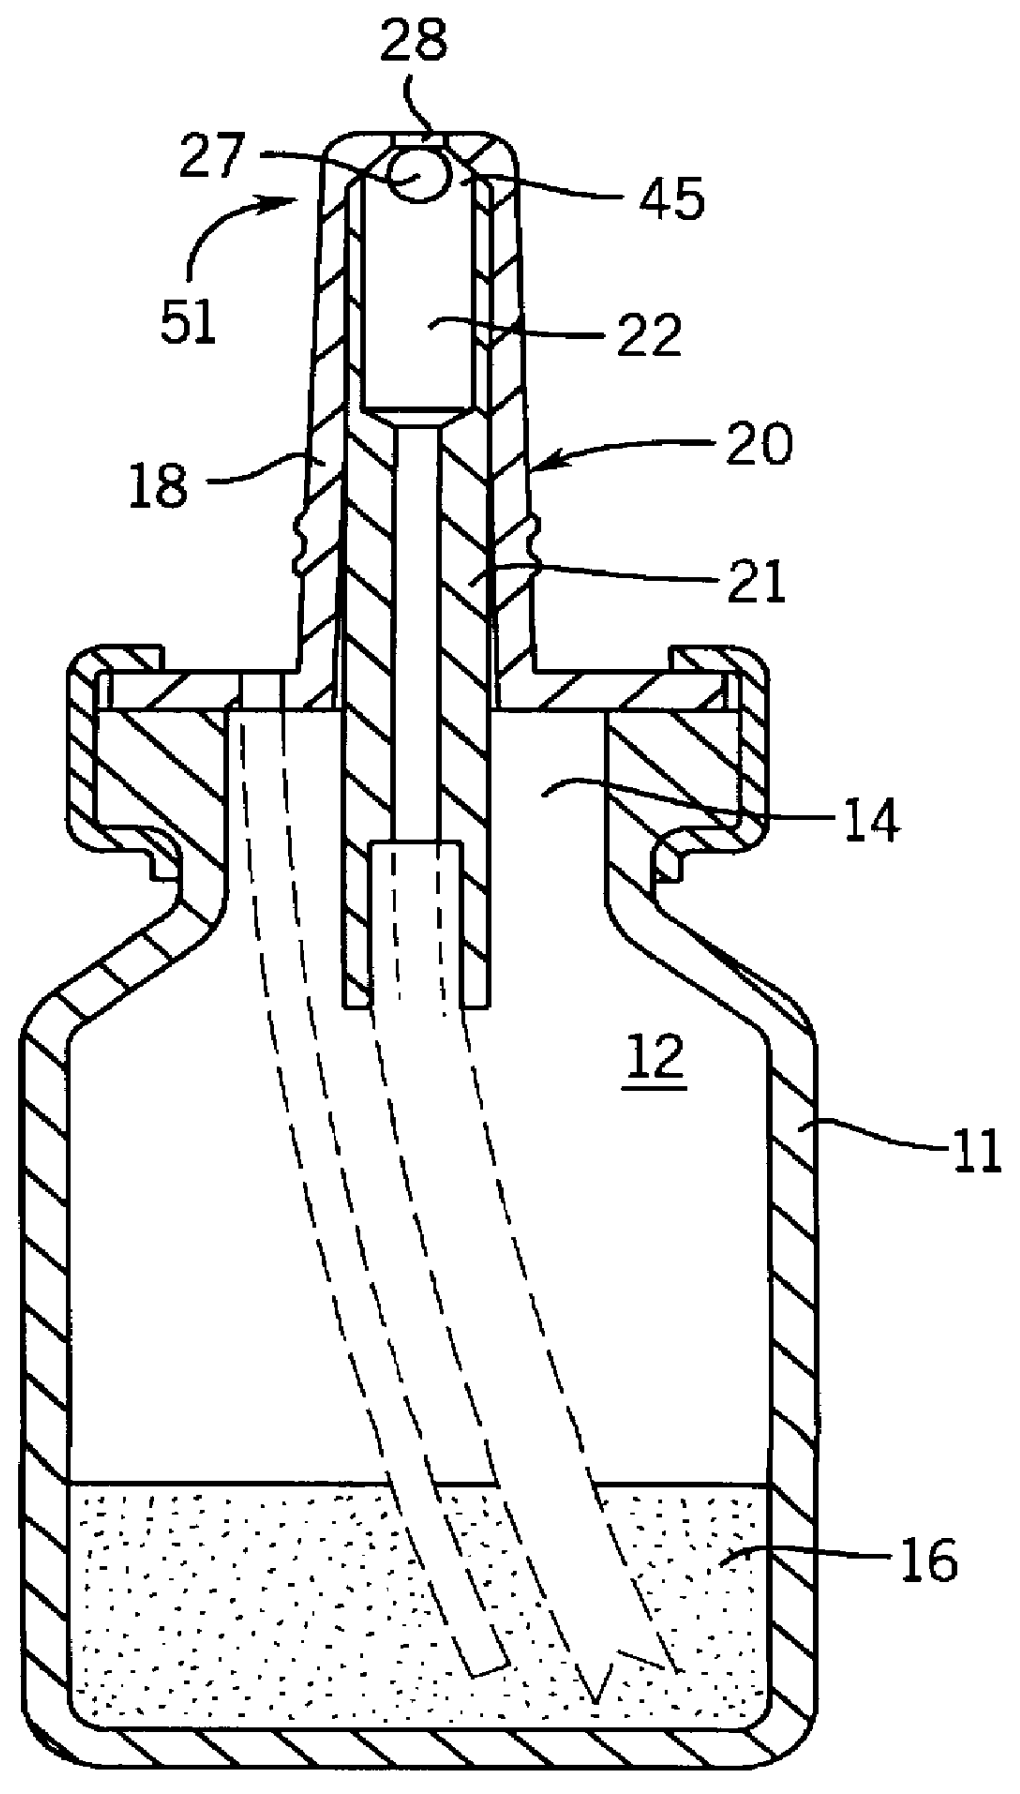 Dosing and discharging device for flowable media including powder/air dispersions